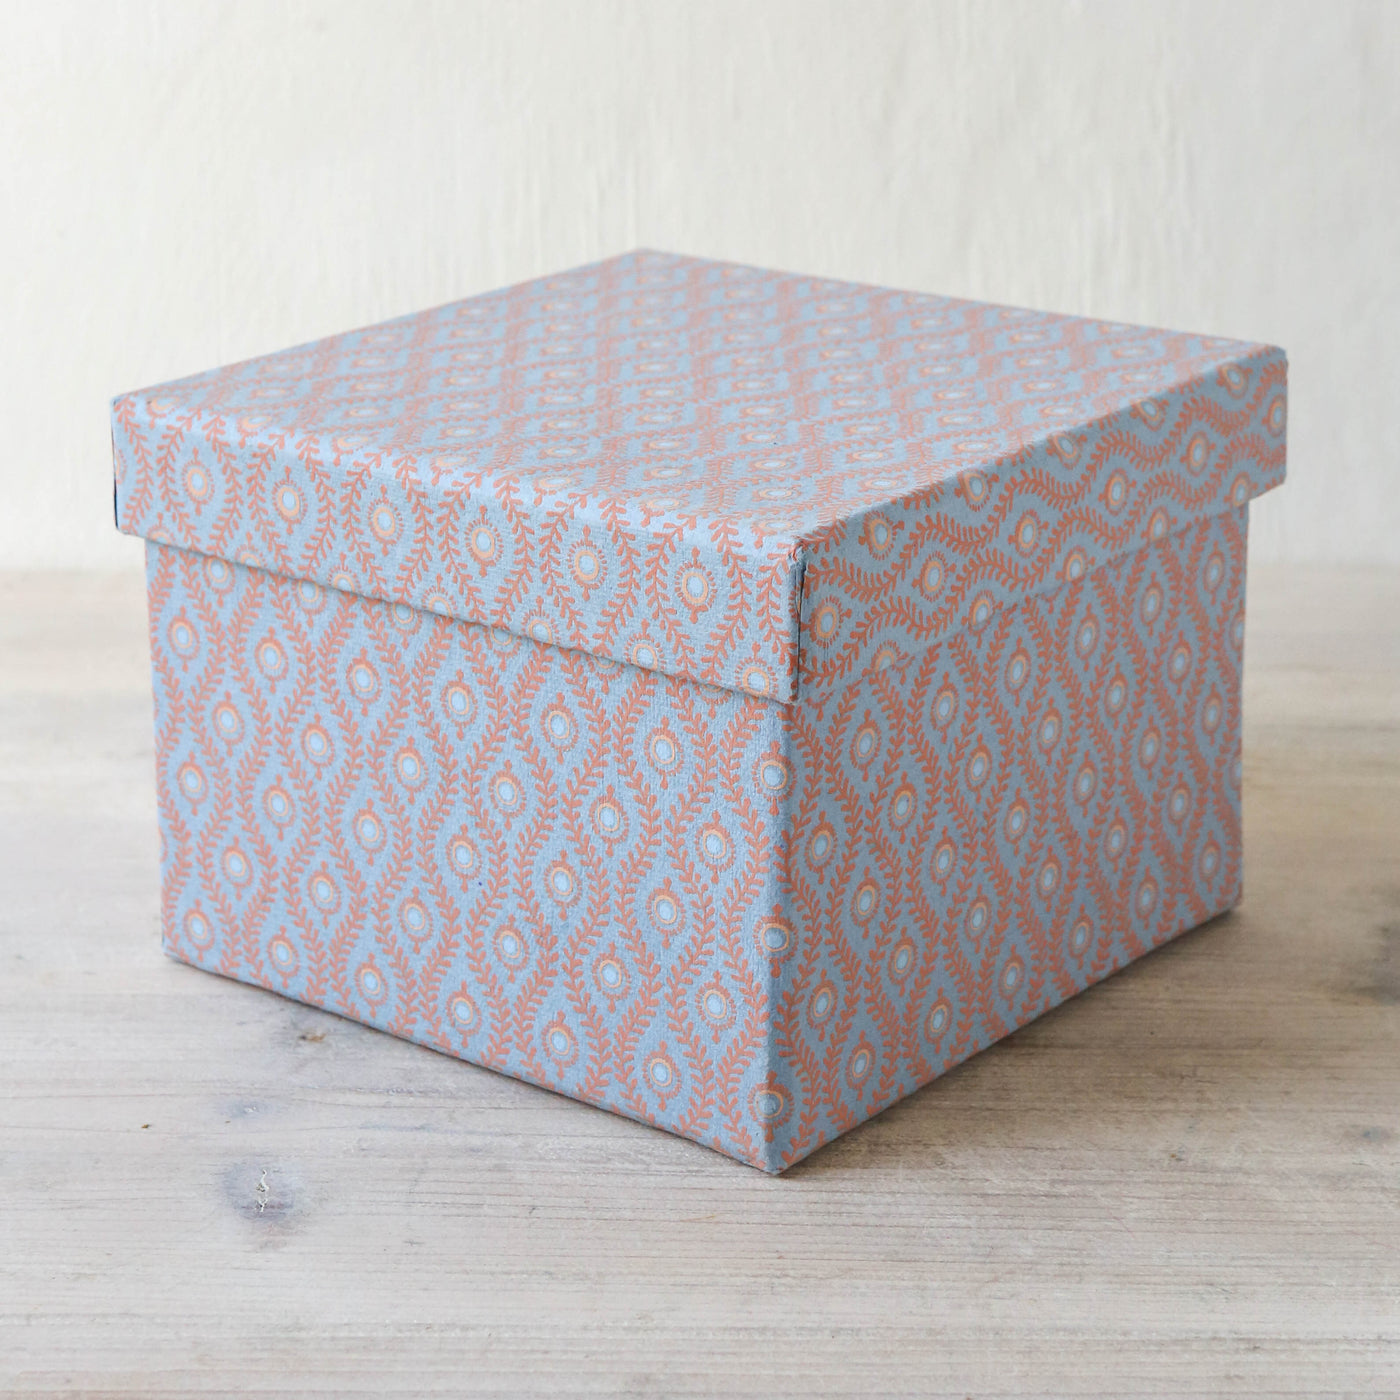 Cubic Covered Storage Box in Lulu Sky - Large